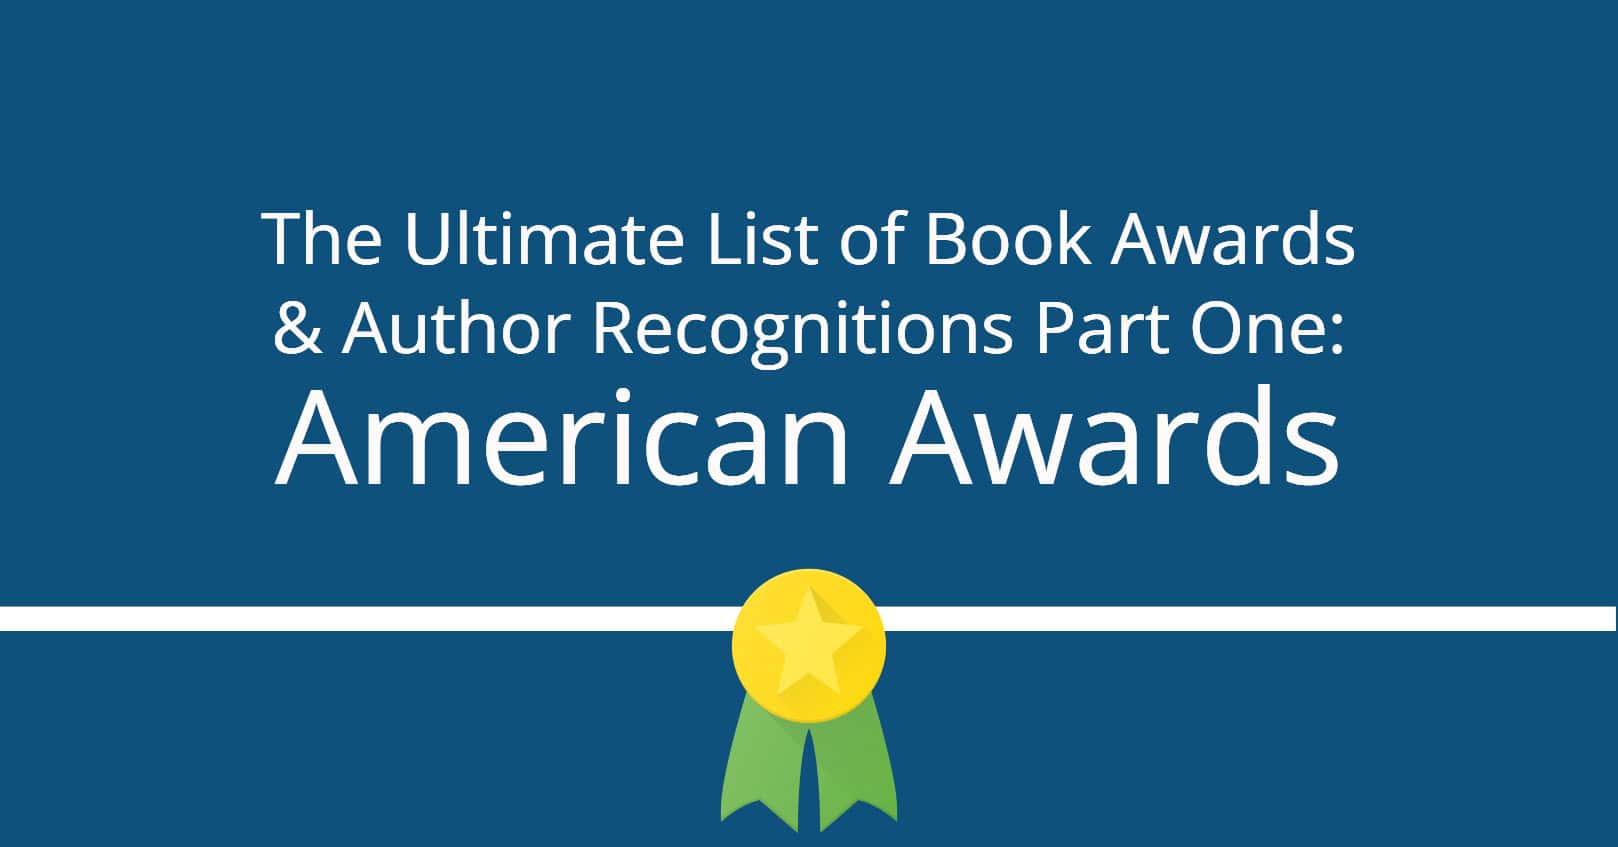 The Ultimate List of Book Awards Part 1